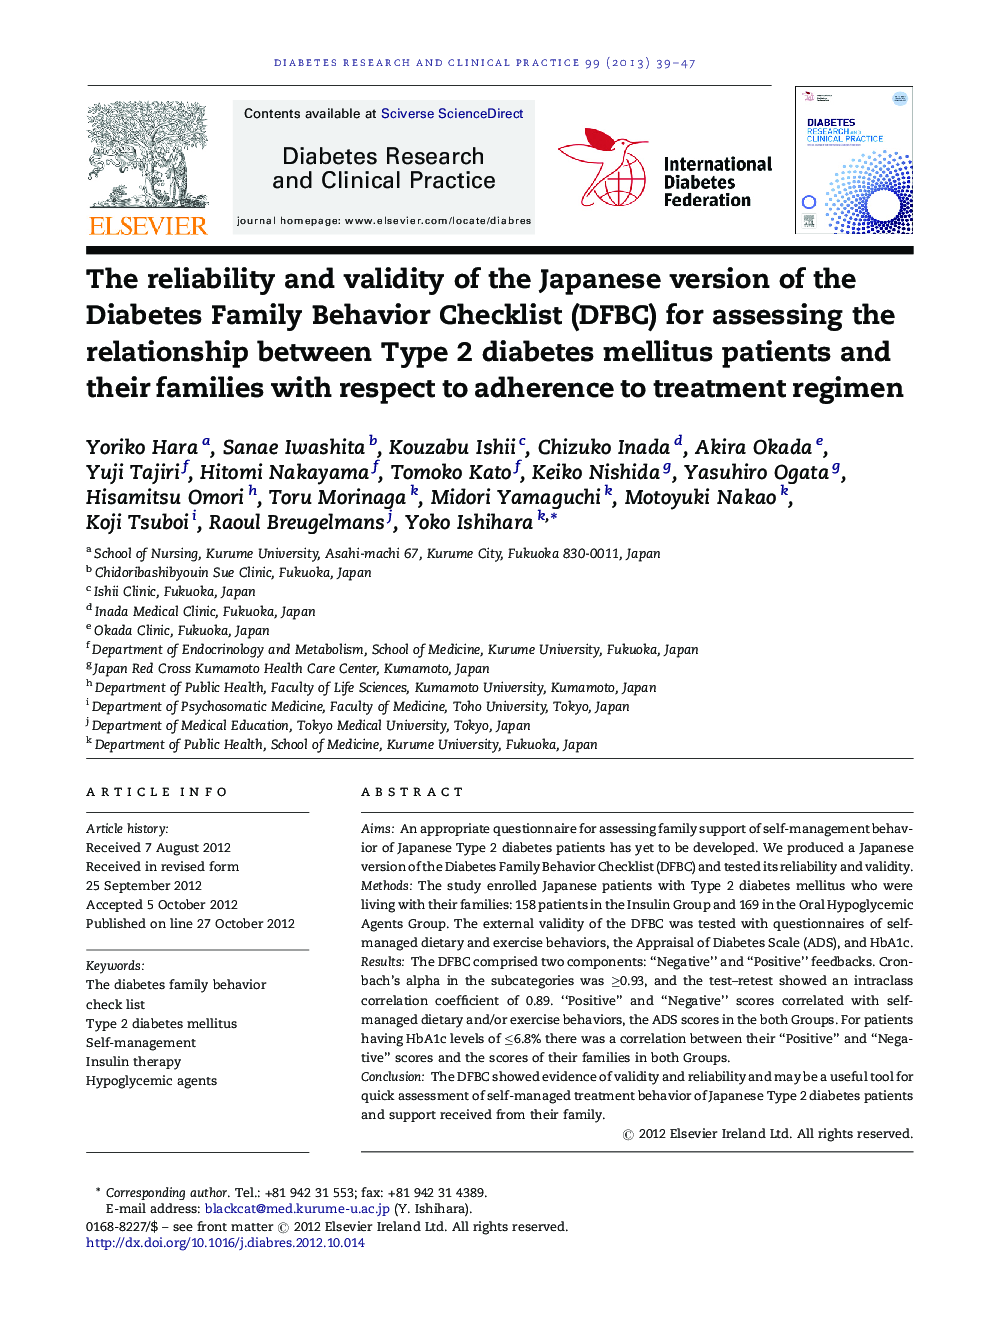 The reliability and validity of the Japanese version of the Diabetes Family Behavior Checklist (DFBC) for assessing the relationship between Type 2 diabetes mellitus patients and their families with respect to adherence to treatment regimen